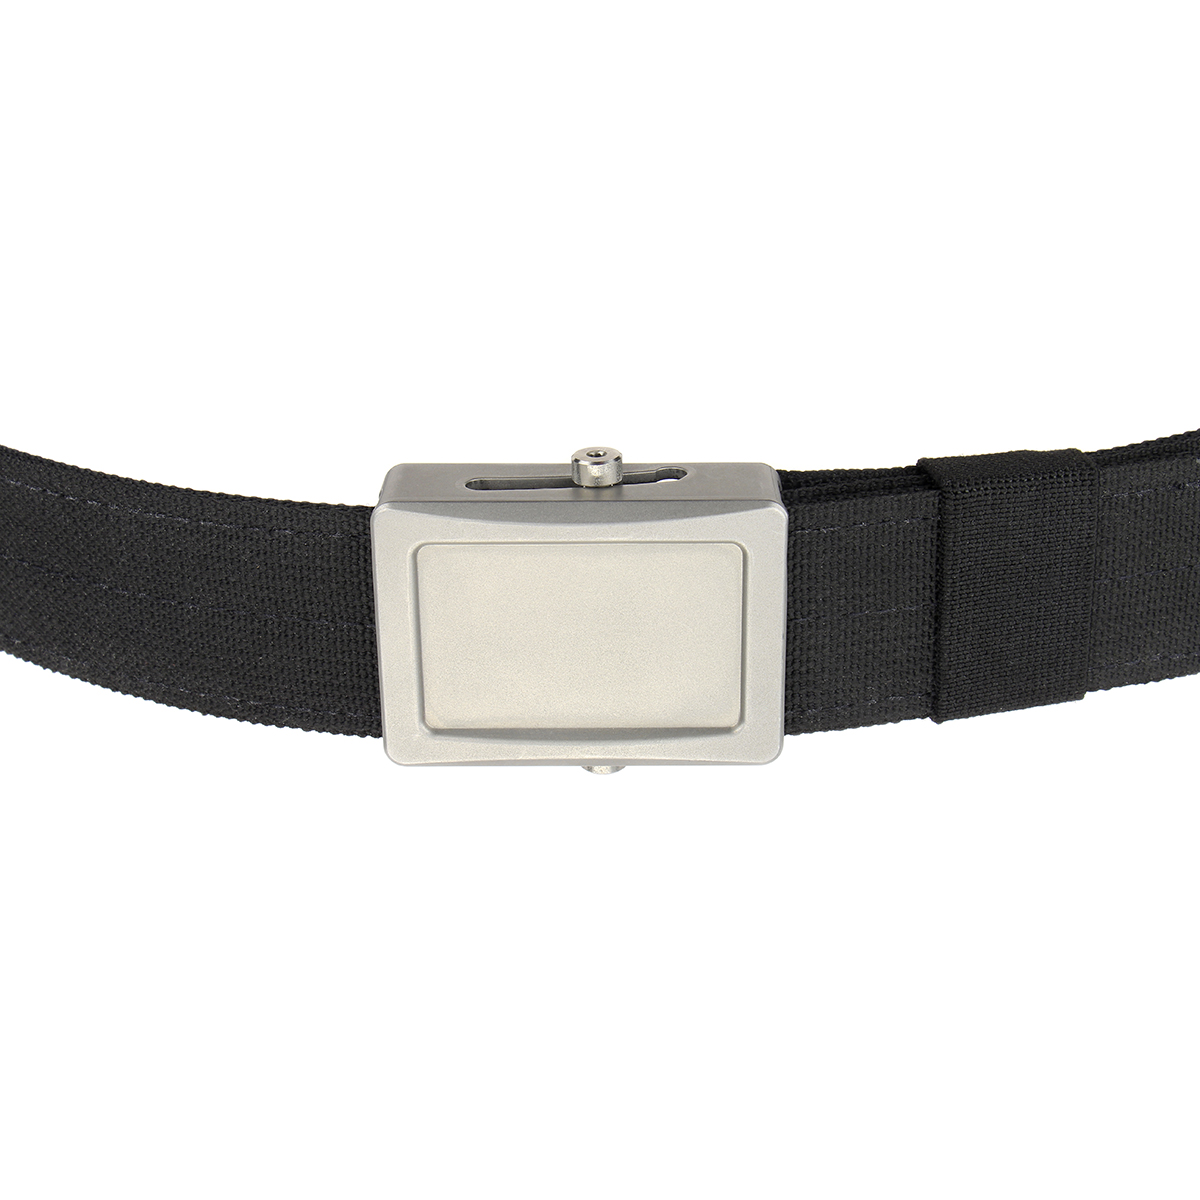 Aegis Enhanced Belt, Gen1 Stainless Buckle - Click Image to Close